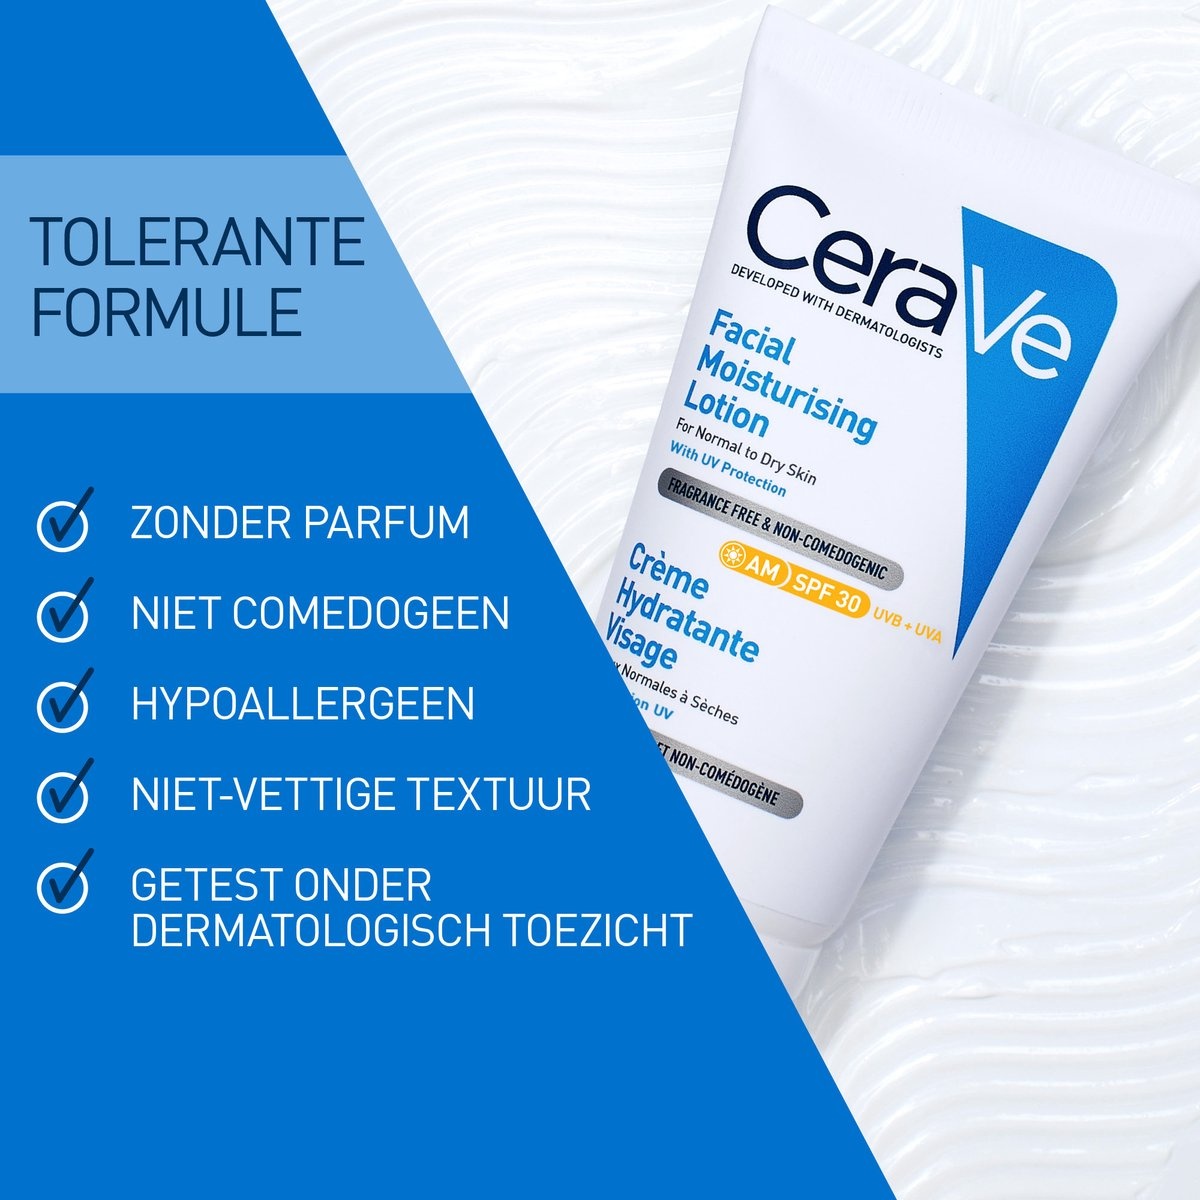 CeraVe Facial Moisturizing Lotion SPF30 - Day cream - normal to dry skin - 52ml - Hydrating day cream - Packaging damaged